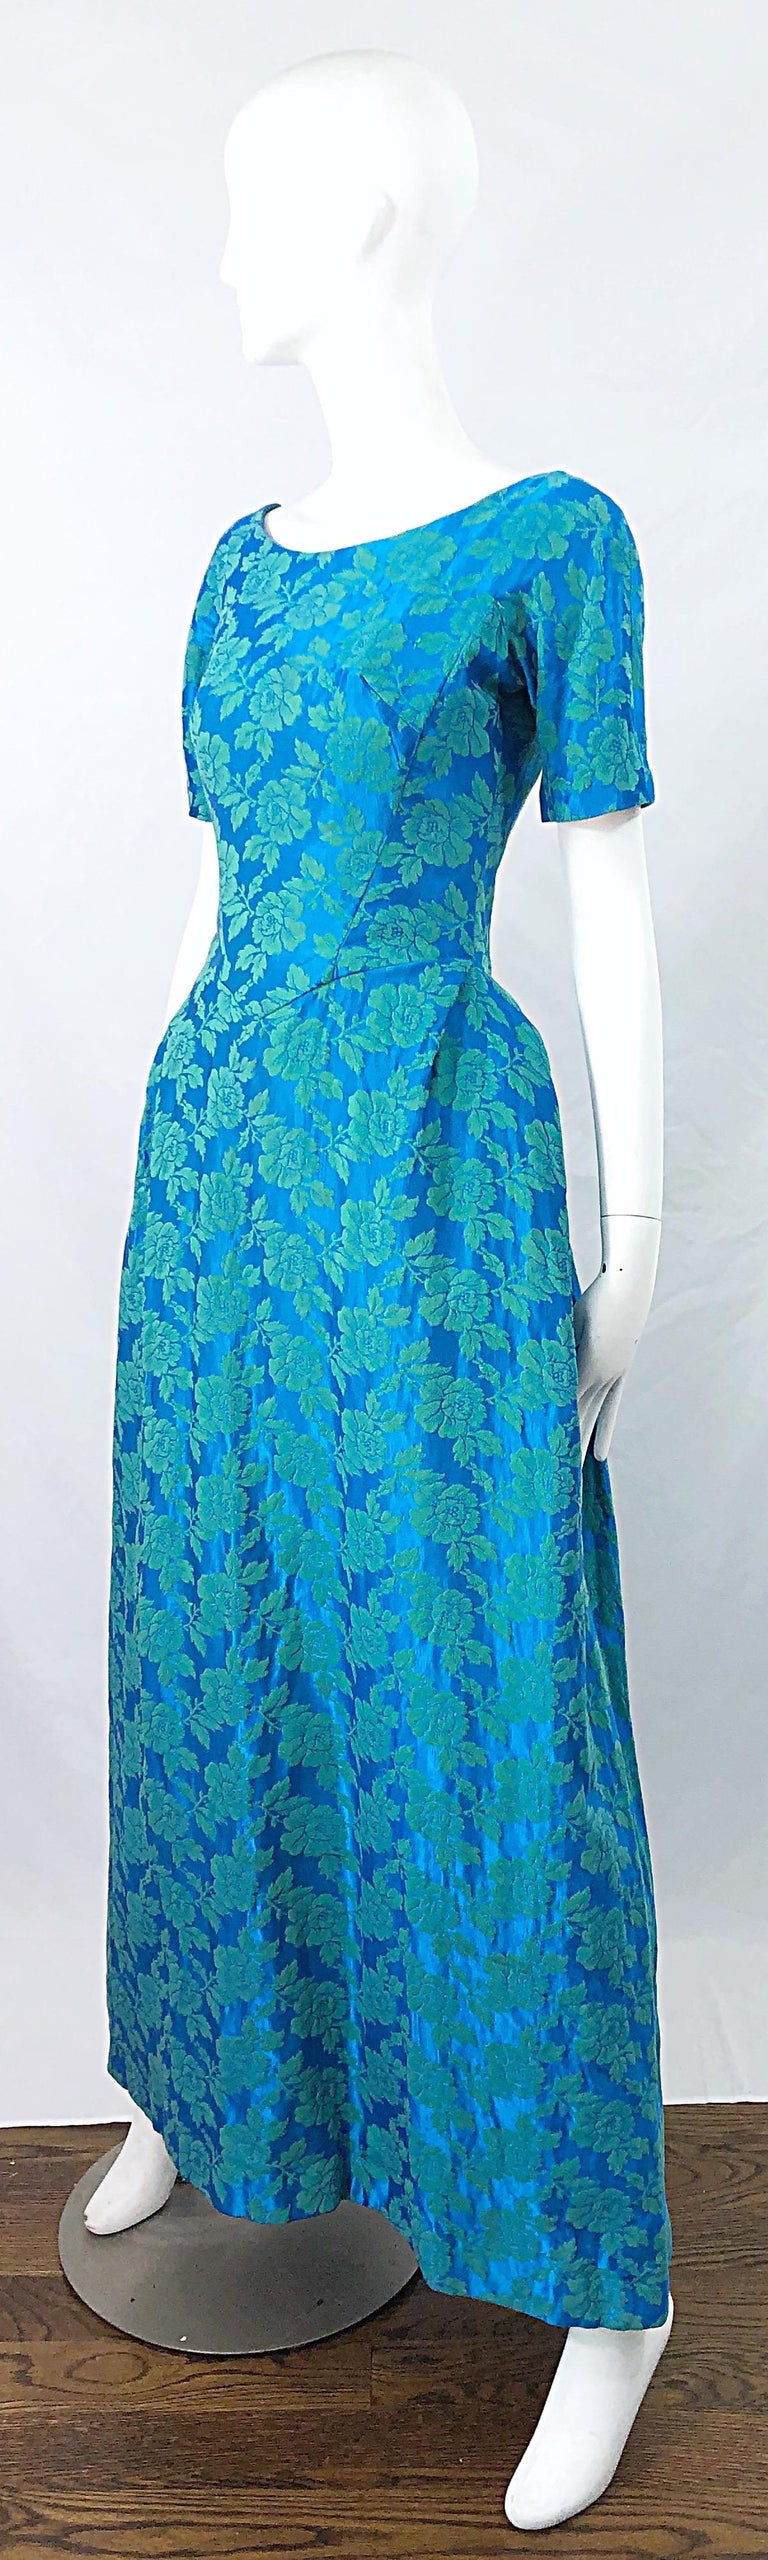 1950s House of Bianchi Demi Couture Turquoise Blue Silk Brocade Vintage 50s Gown For Sale 1